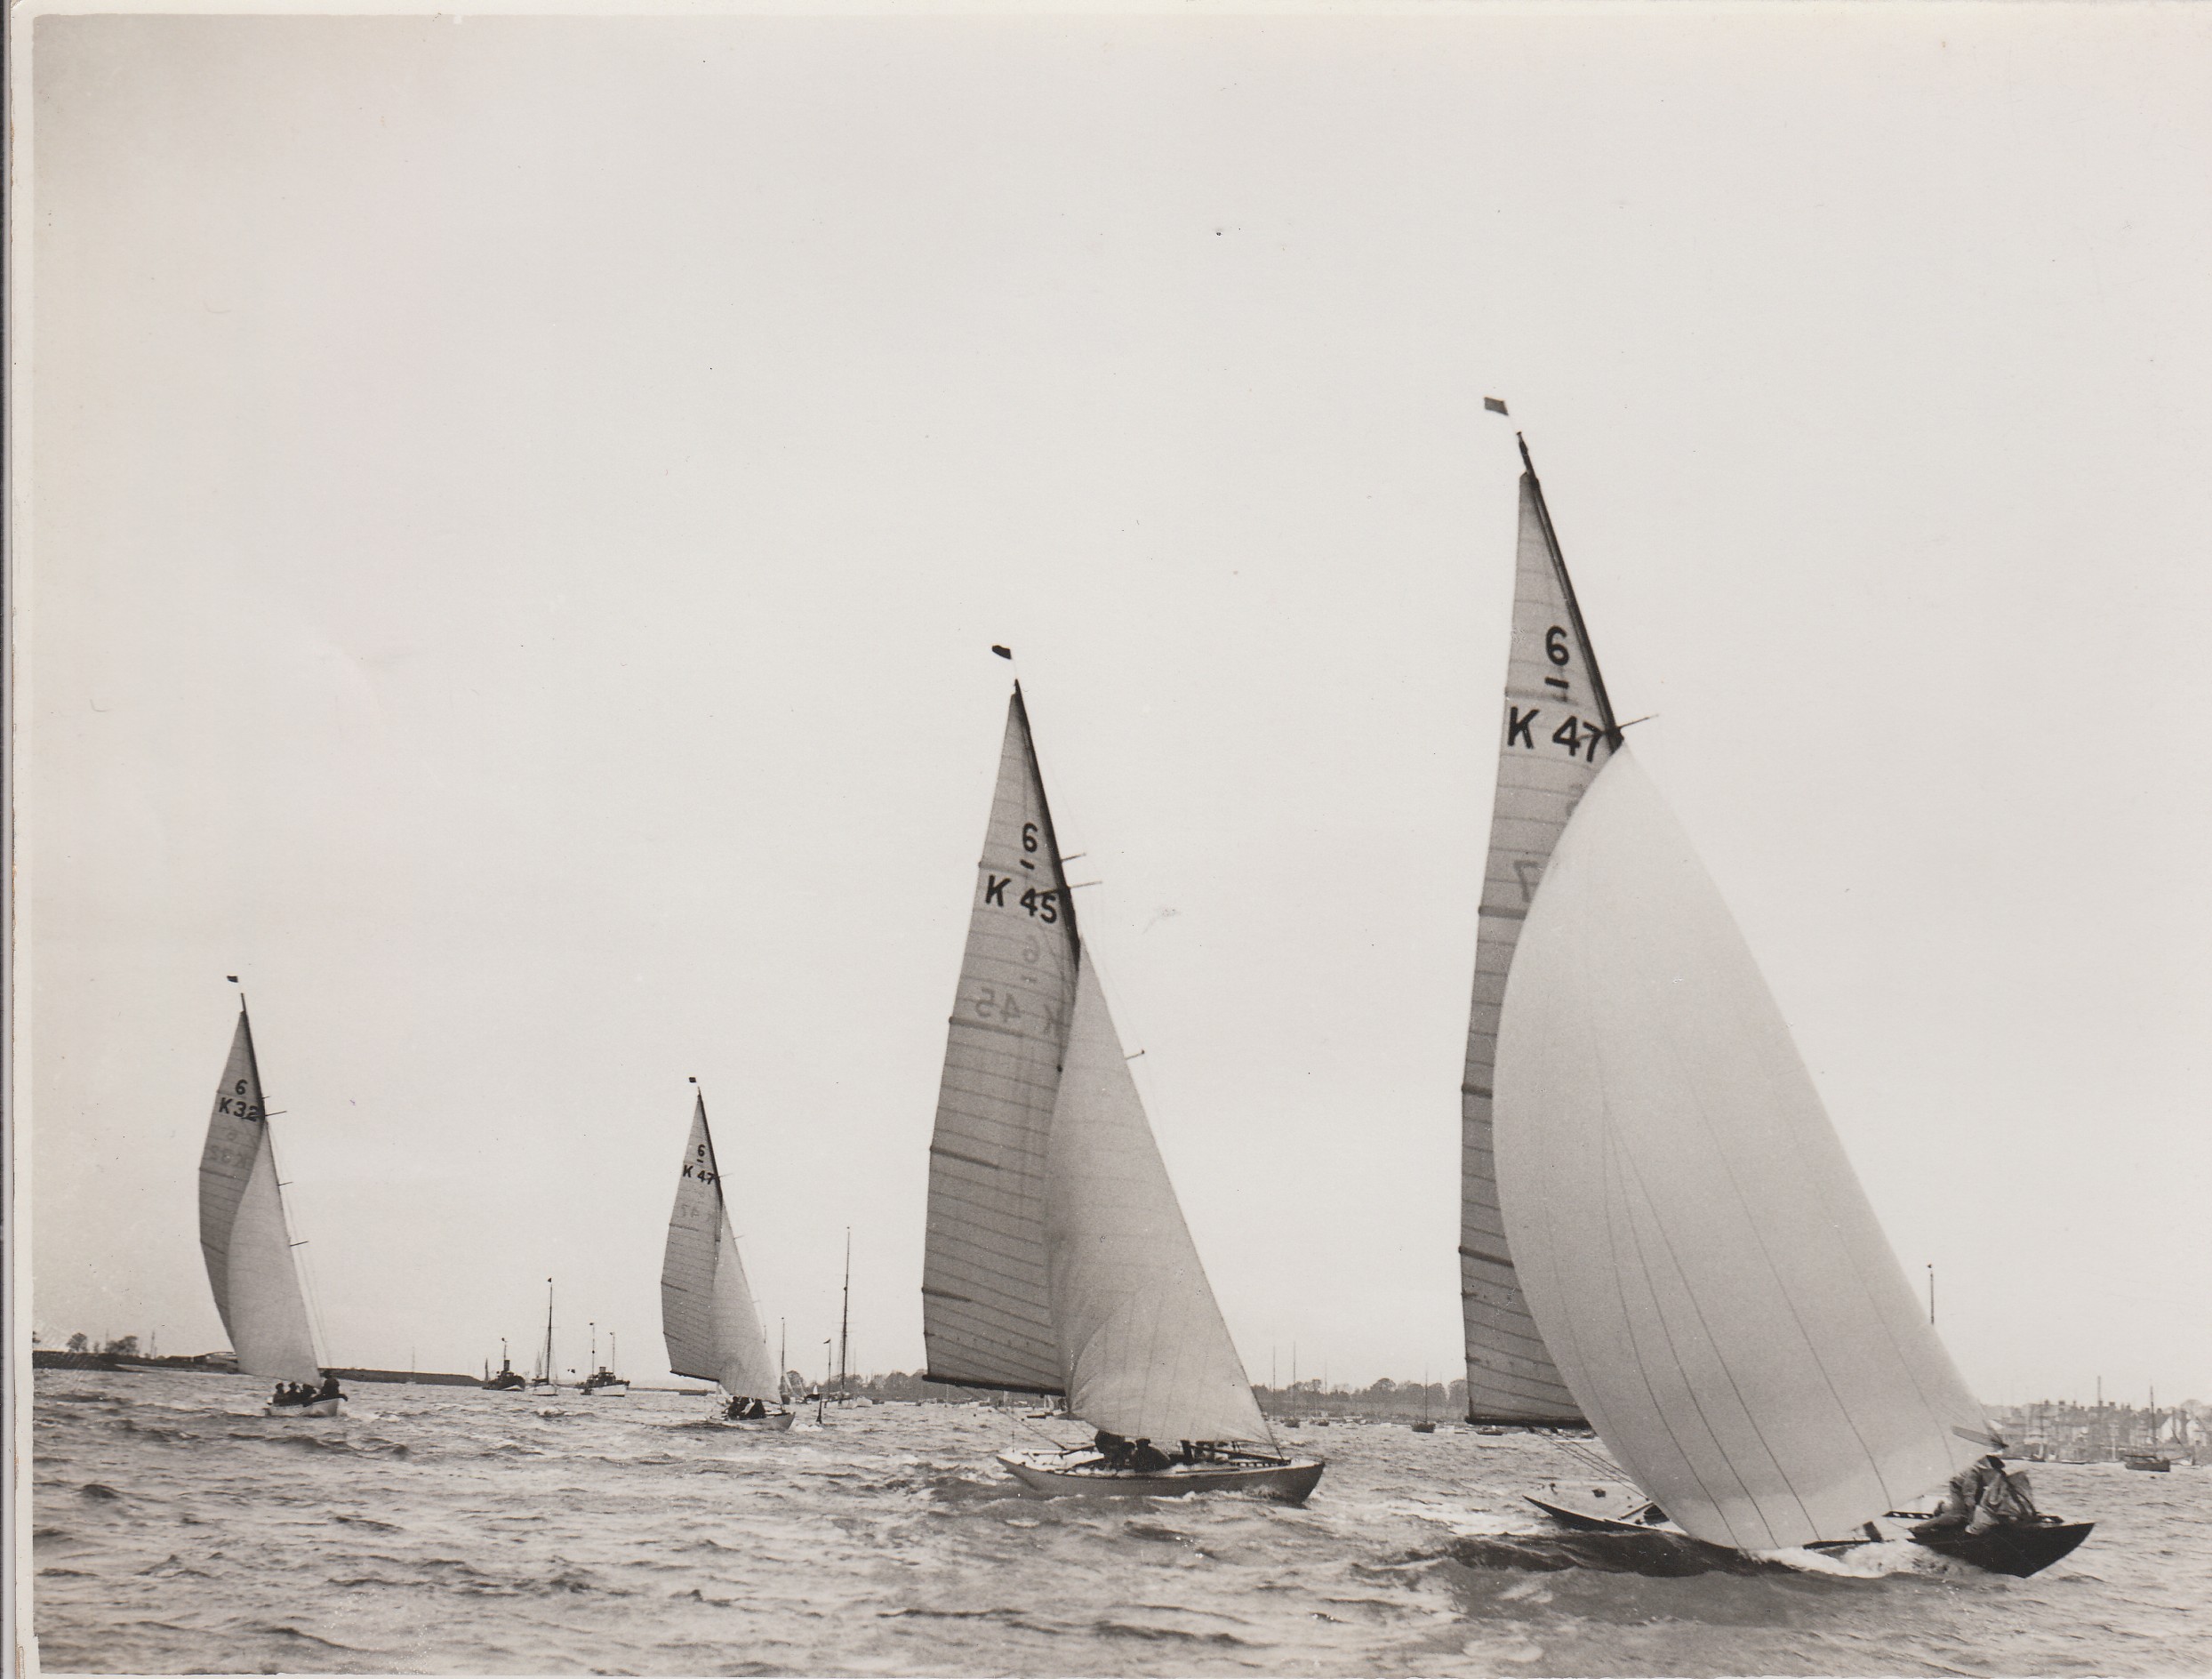 Black and white photograph of four Six Metre sailing boats racing.